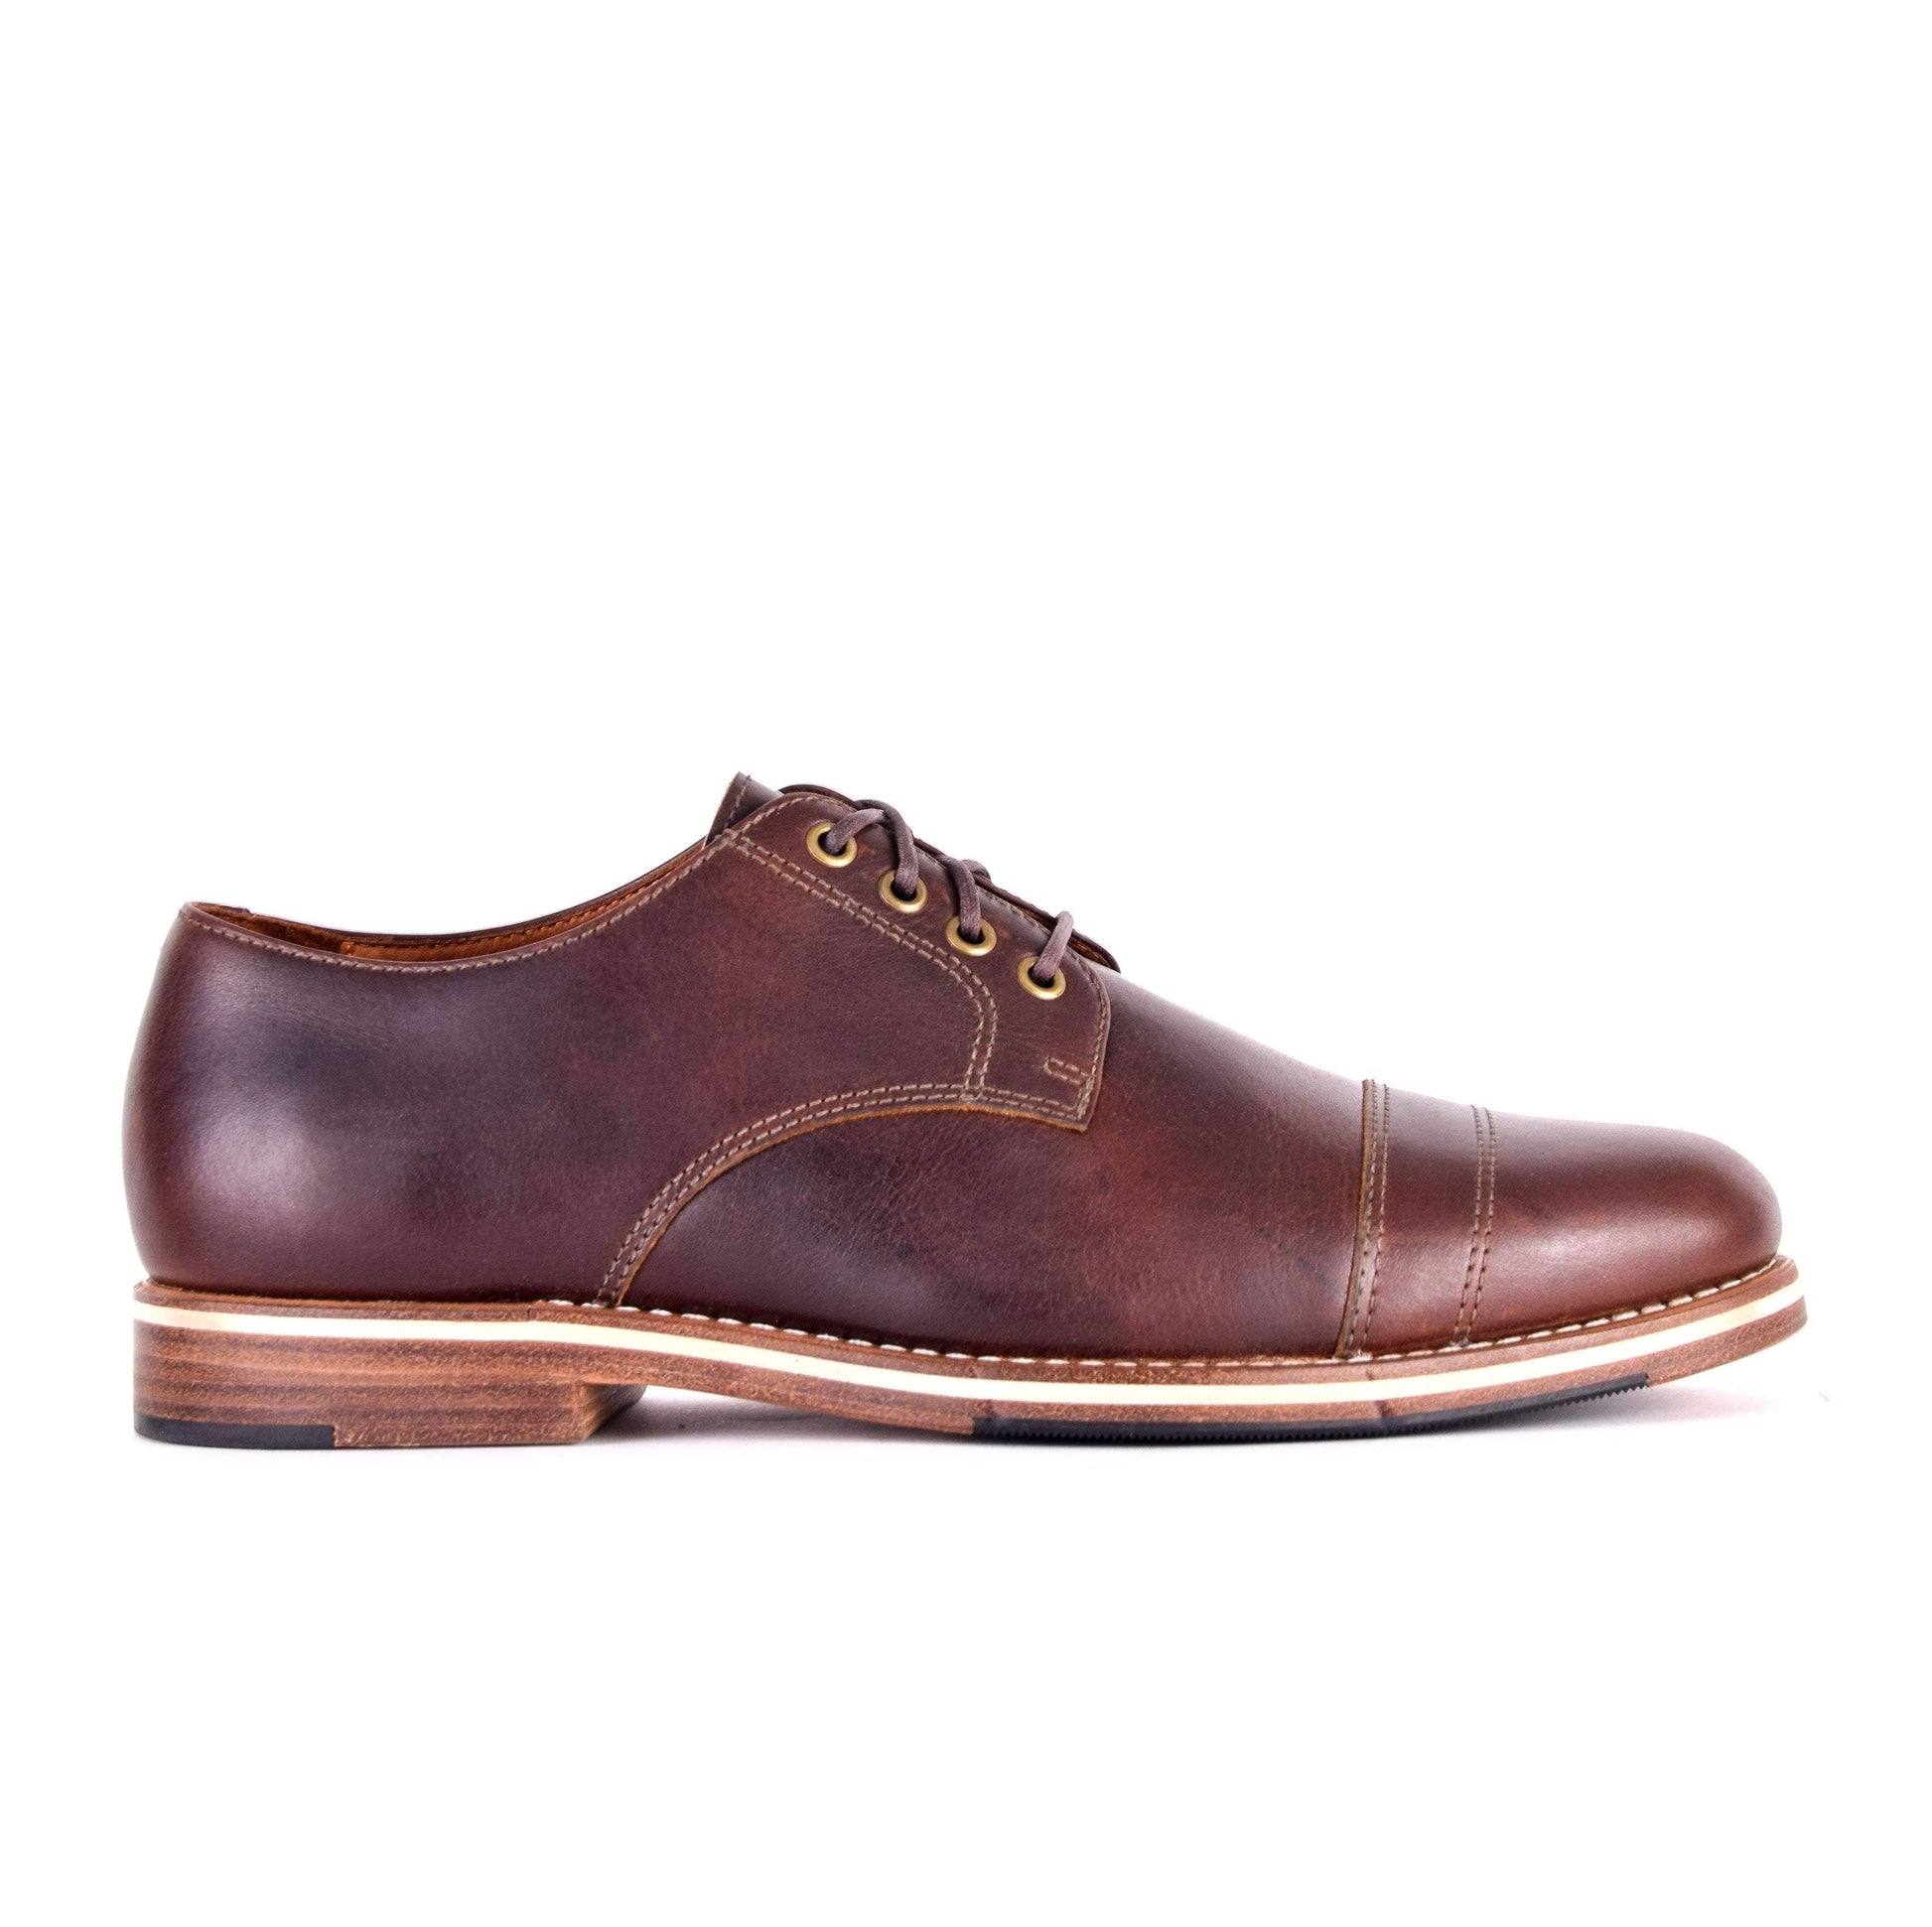 HELM Shoes The Bradley Brown